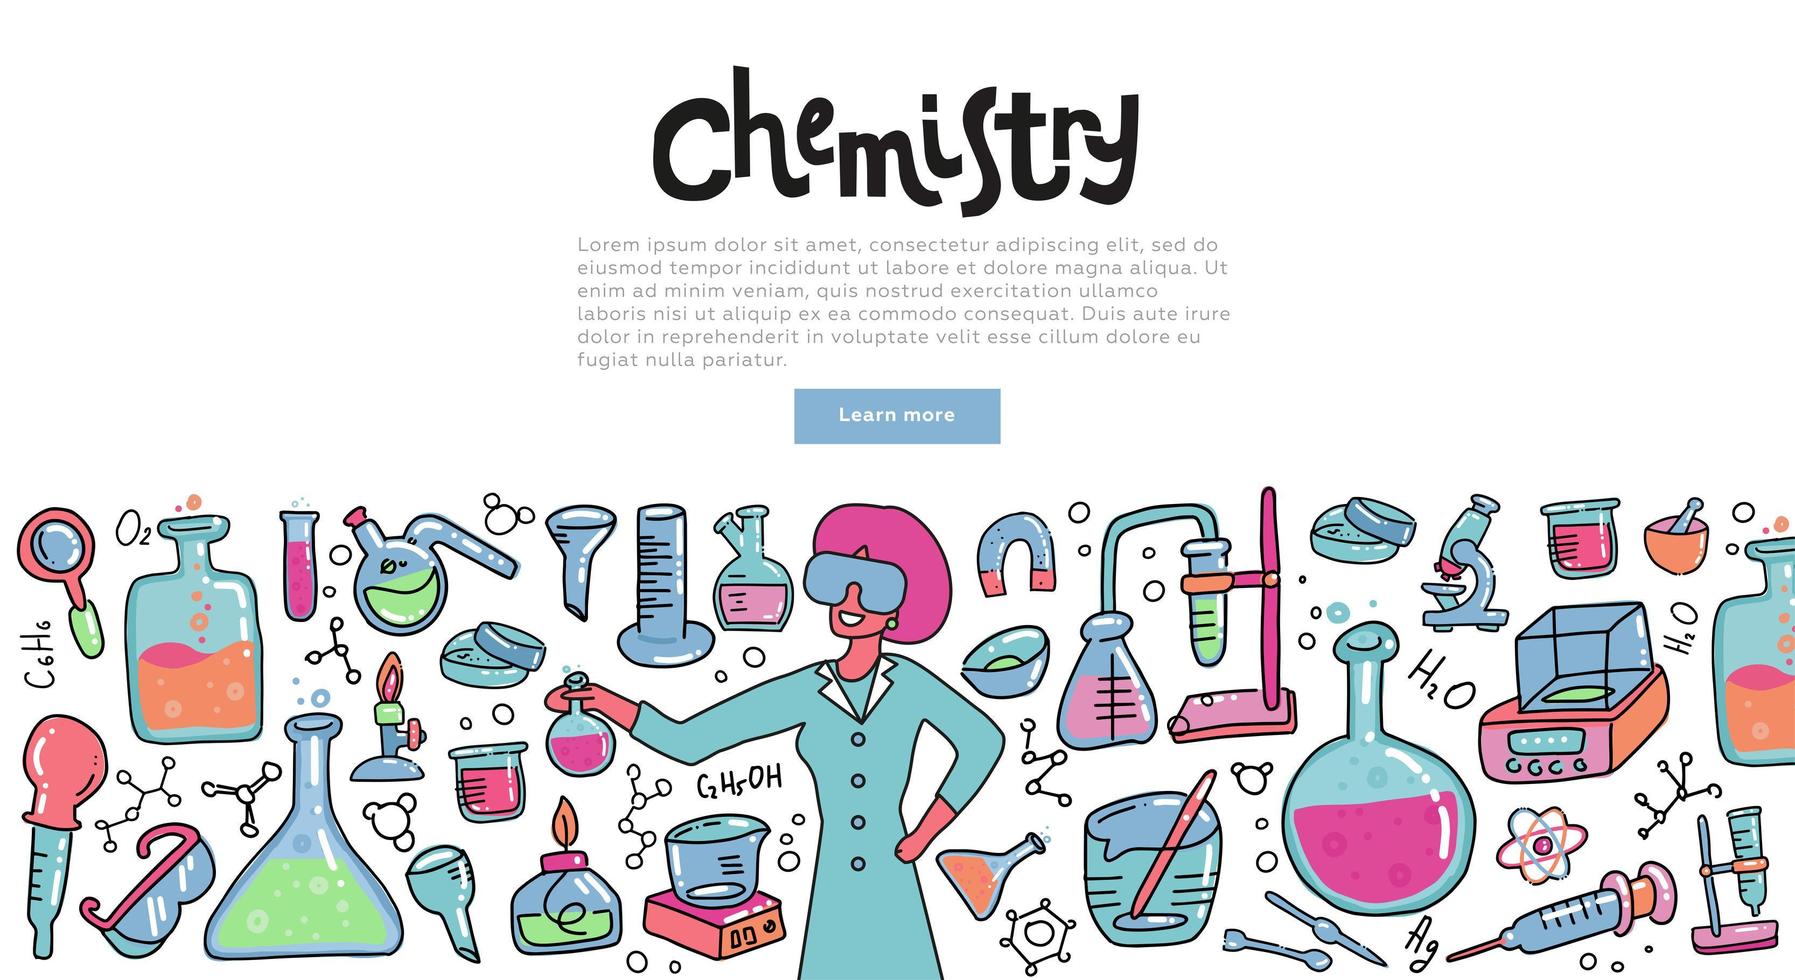 Scientist woman with a chemistry glass explaining chemical reaction. Education concept of chemistry science for banners. Doodle vector color illustration